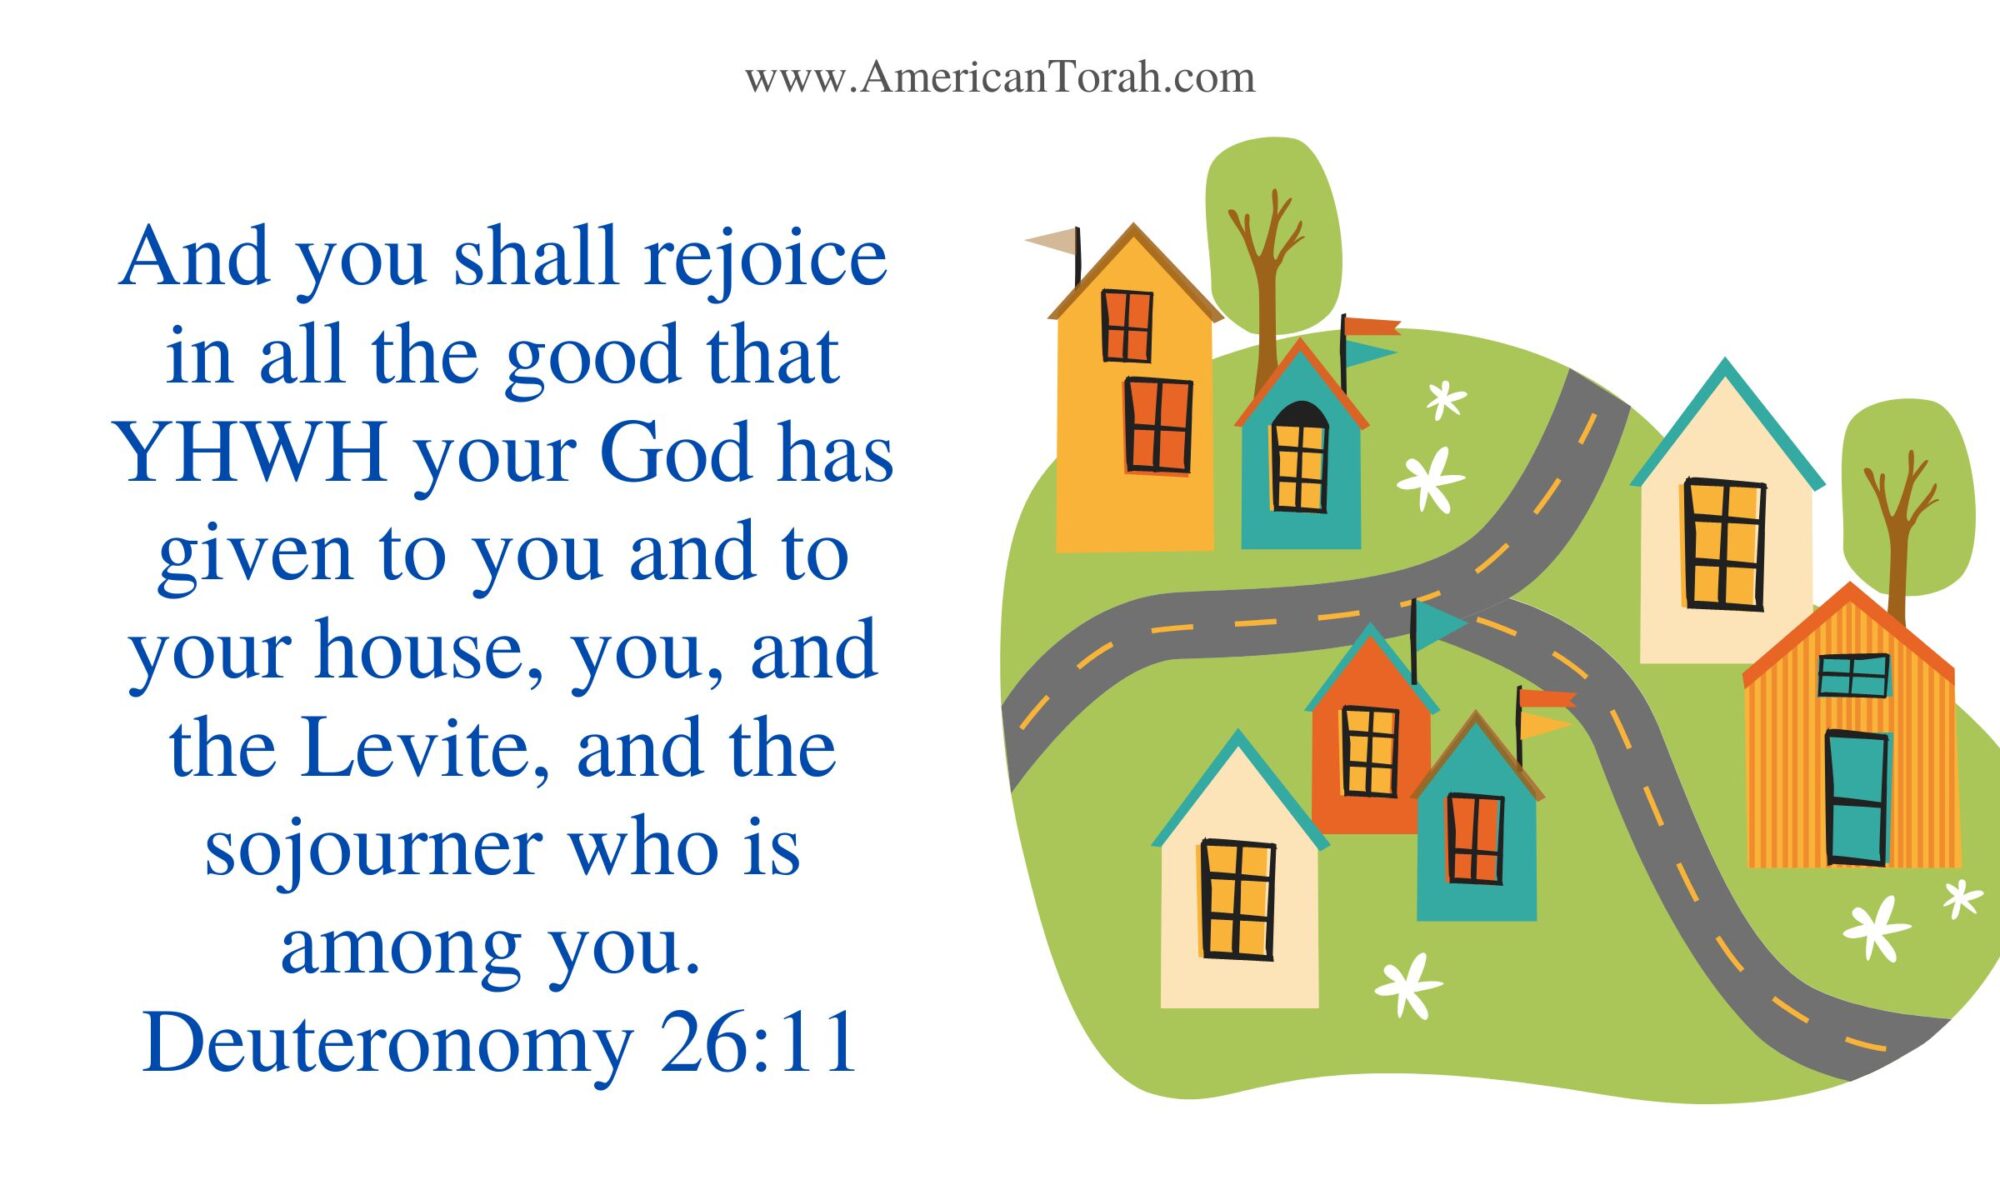 And you shall rejoice in all the good that the LORD your God has given to you and to your house, you, and the Levite, and the sojourner who is among you. Deuteronomy 26:11 ESV